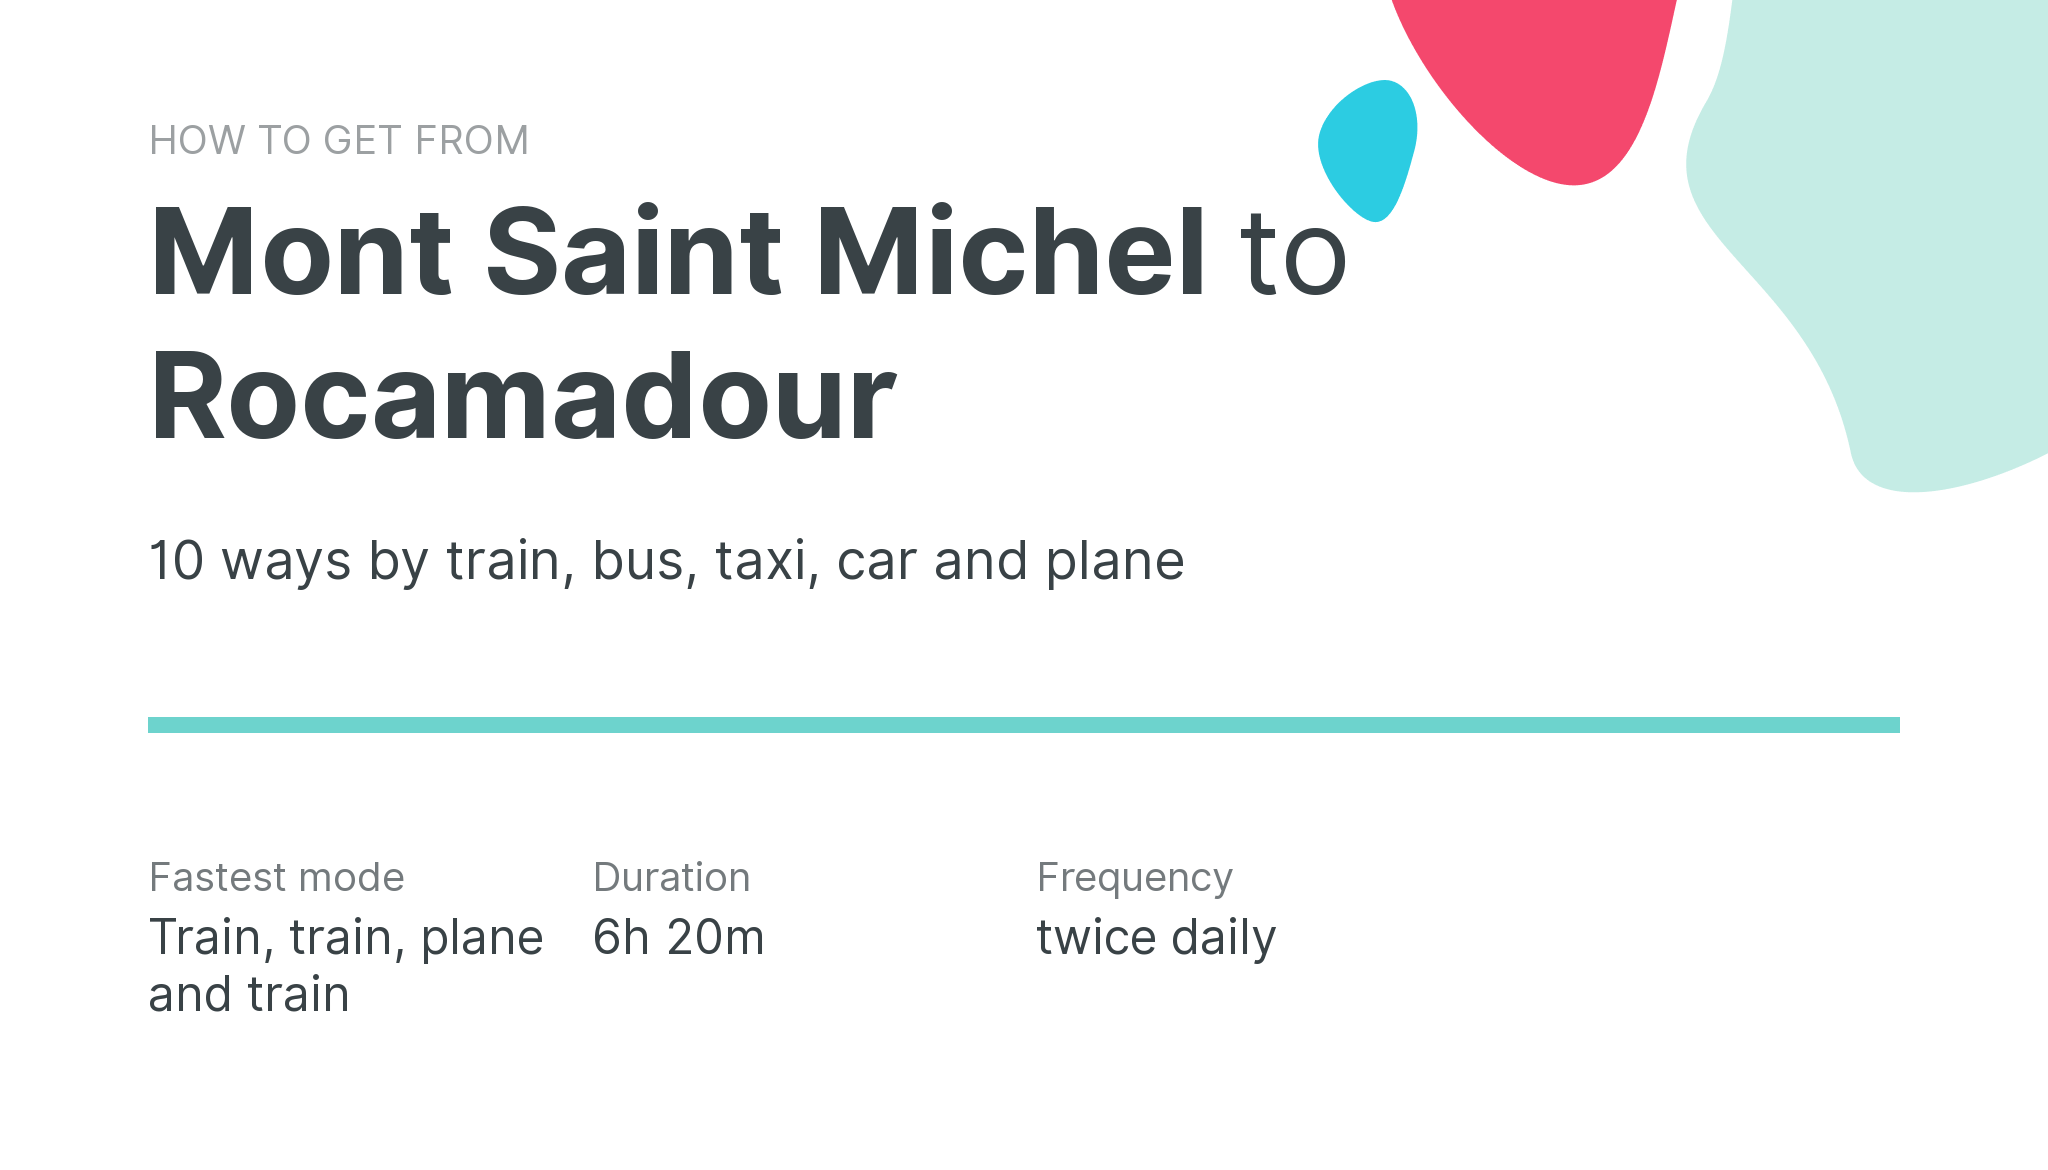 How do I get from Mont Saint Michel to Rocamadour